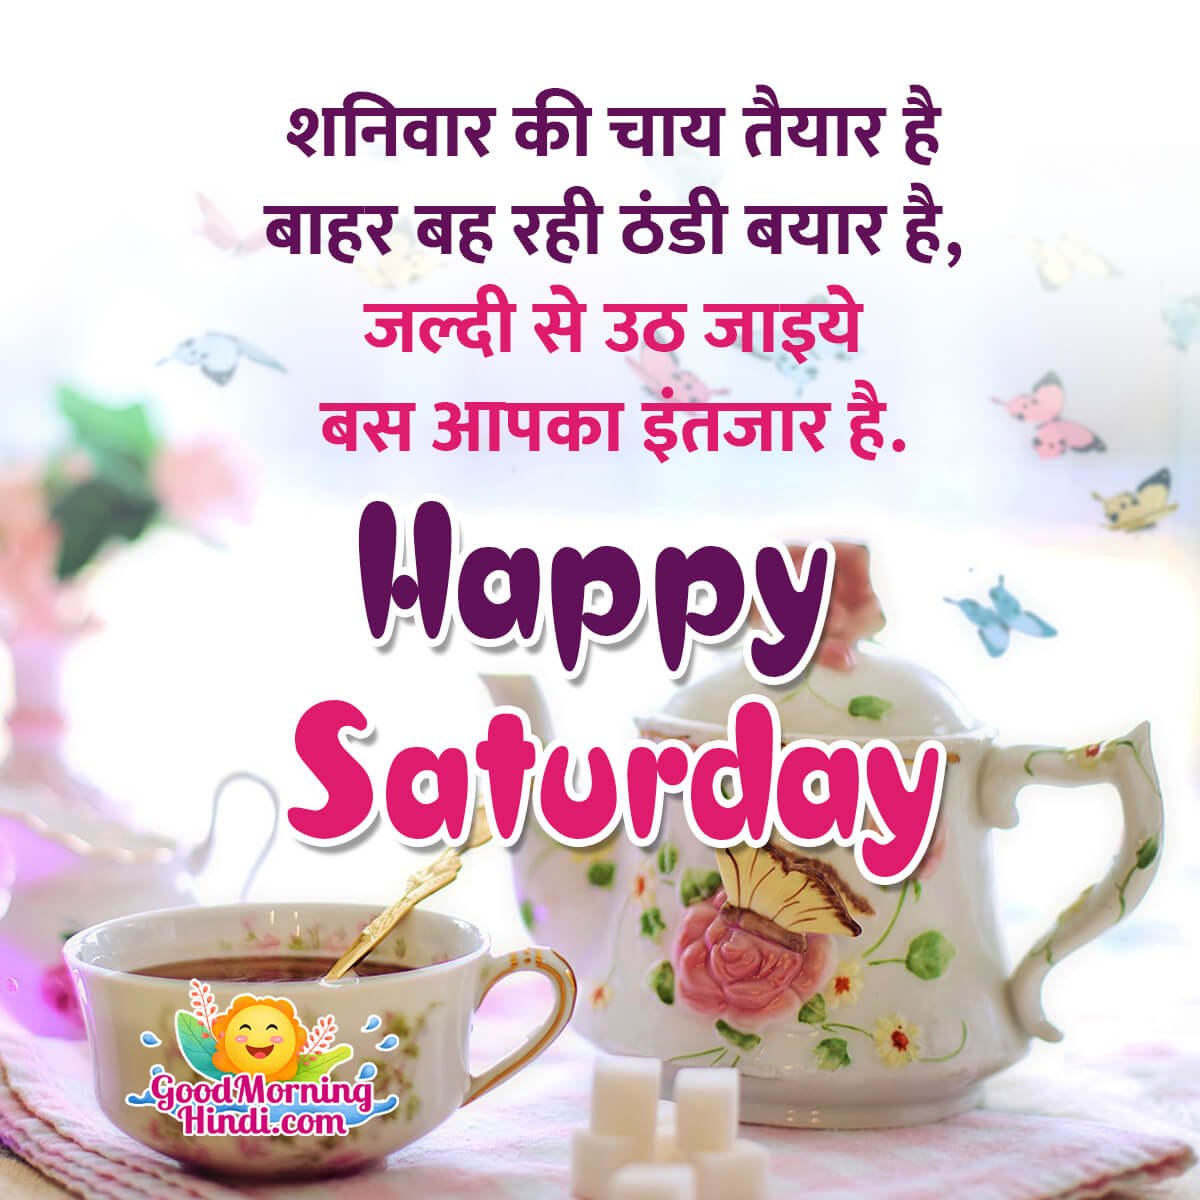 Happy Saturday Messages In Hindi - Good Morning Wishes & Images In ...